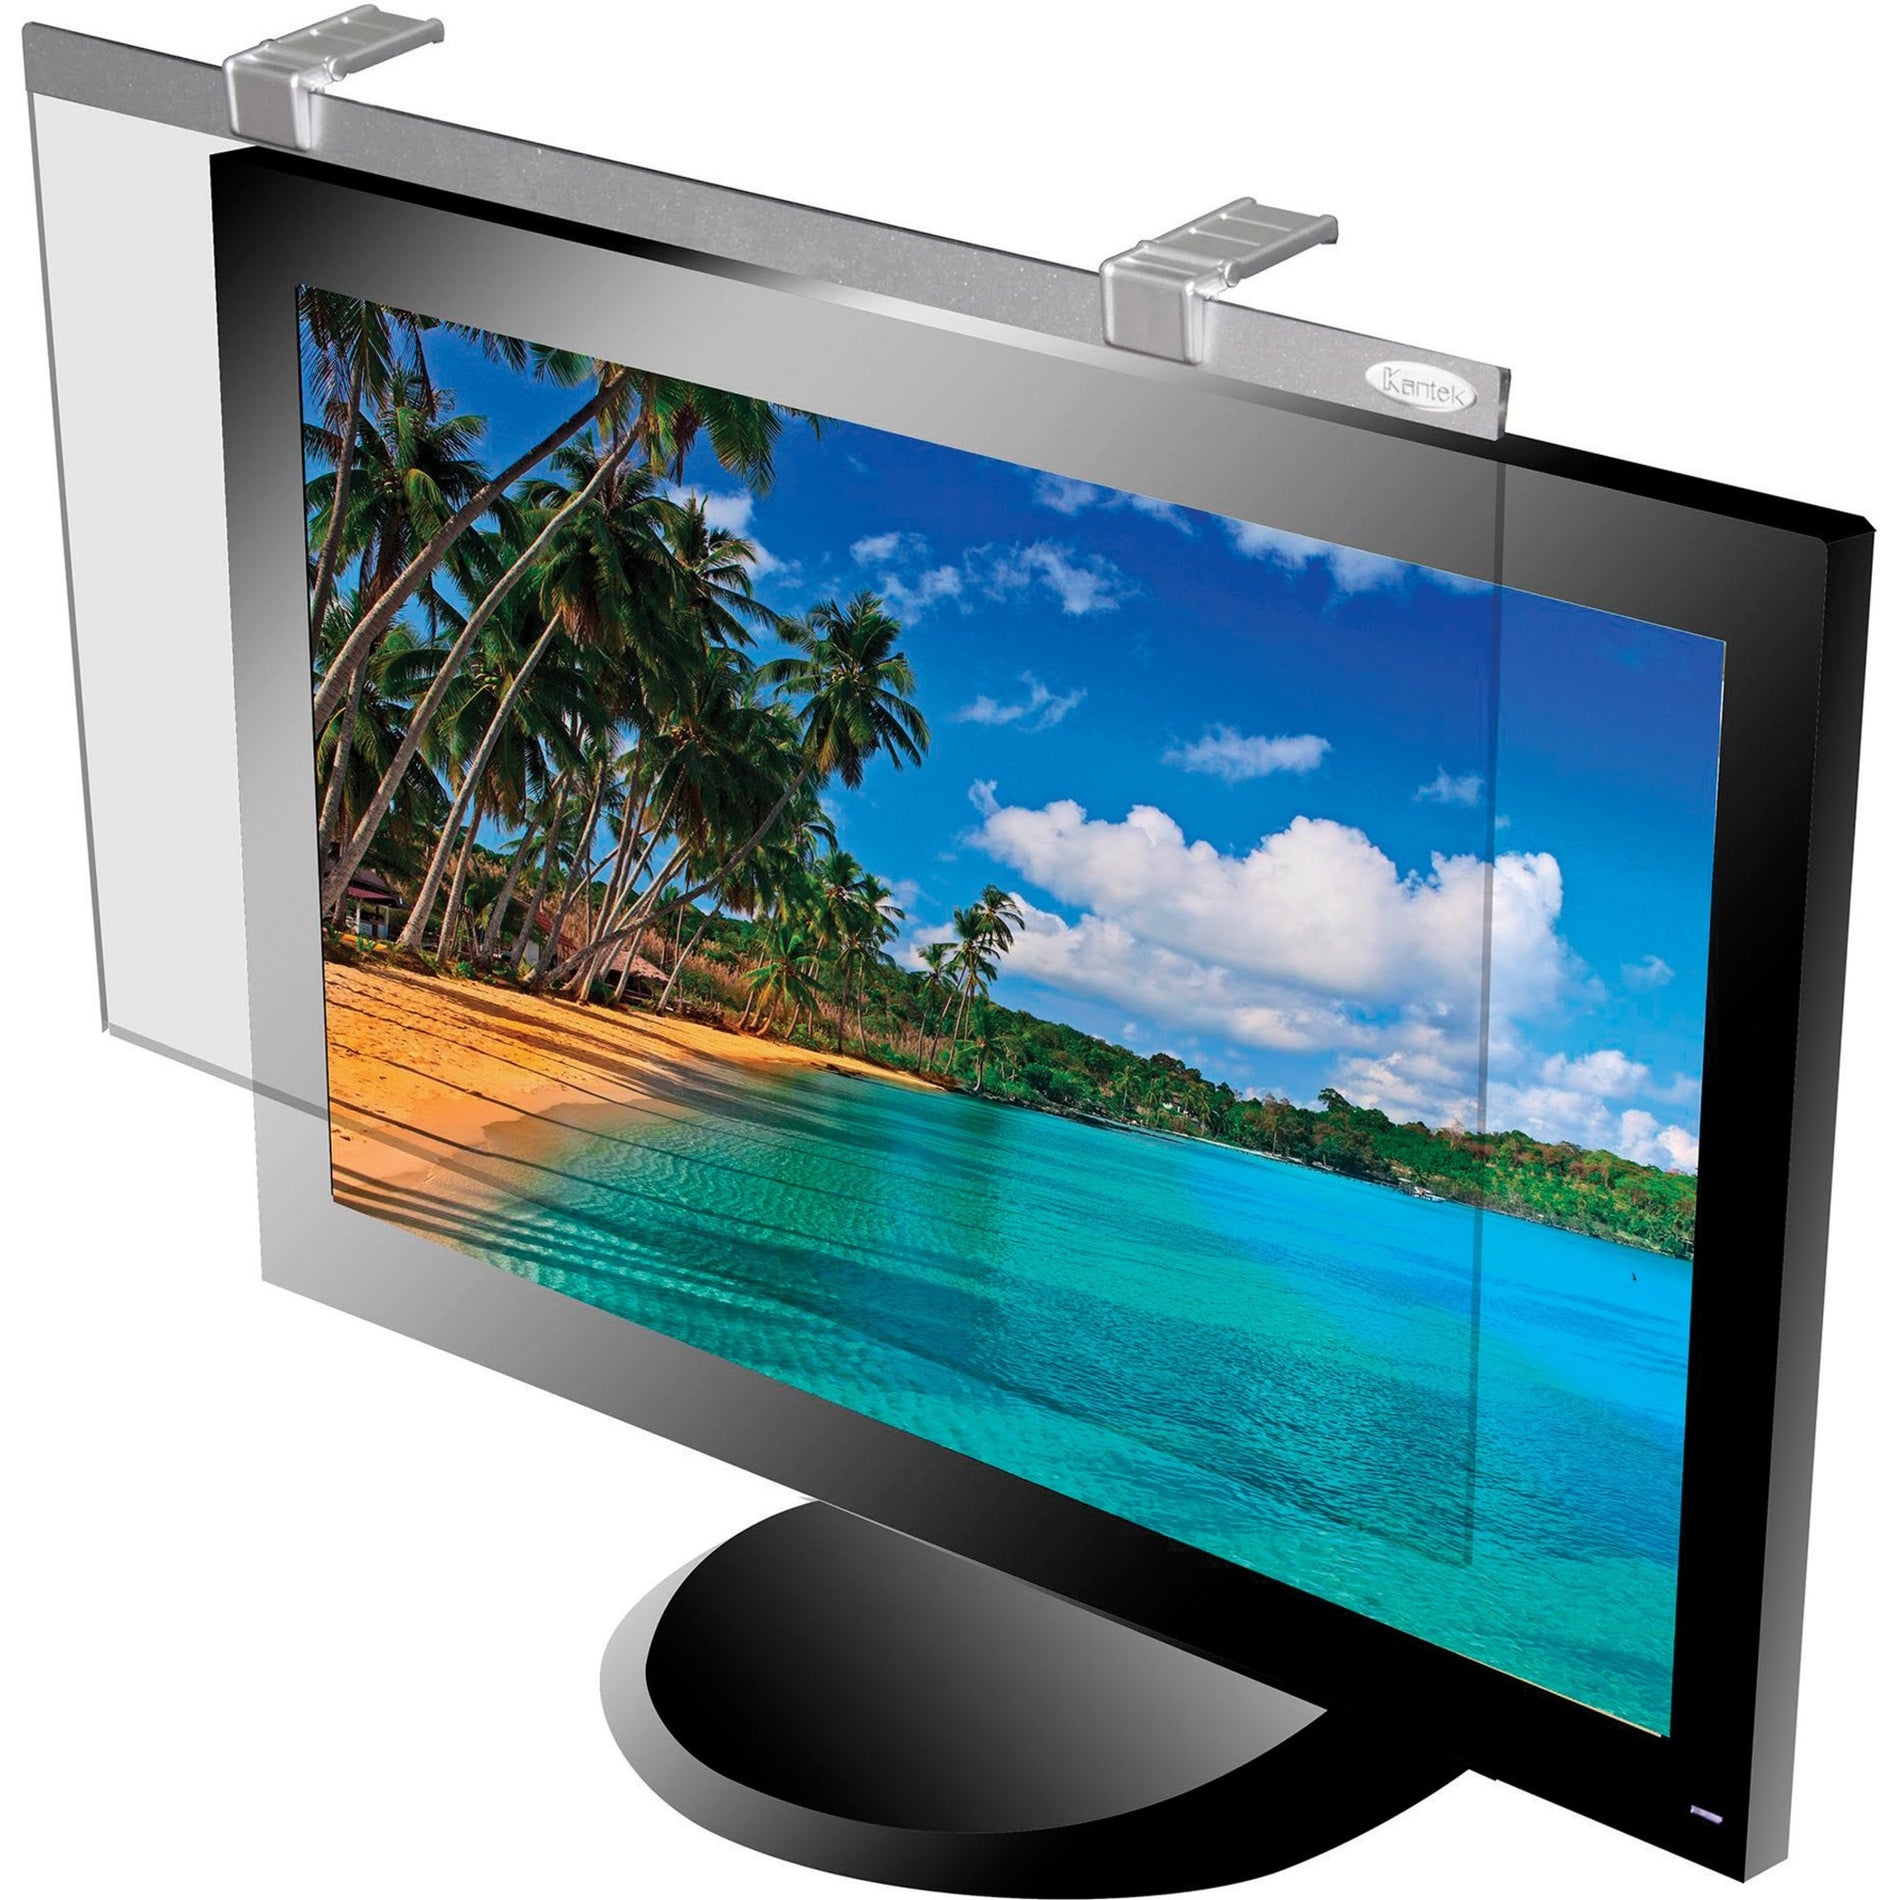 Kantek LCD22W LCD Protective Filter, Anti-Glare, Damage and Scratch Resistant, Silver